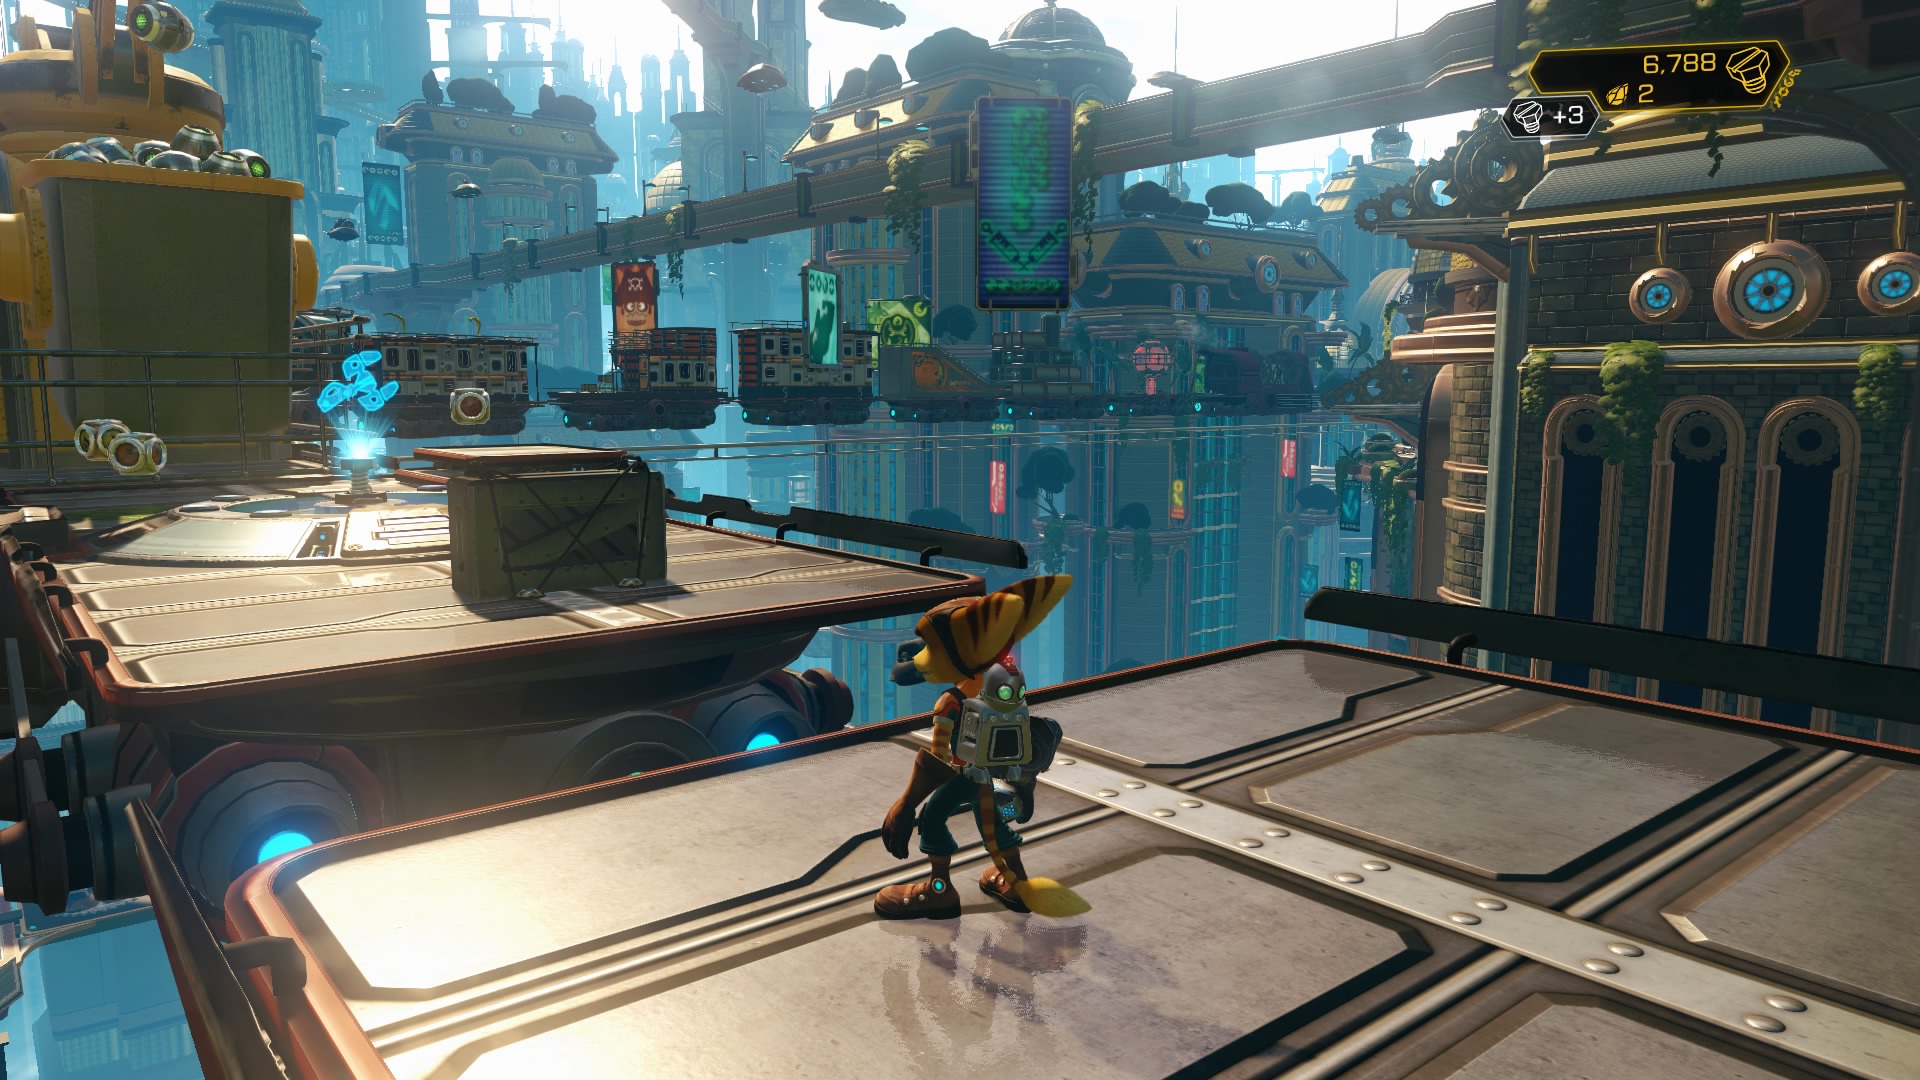 Review: Ratchet and Clank (PS4)